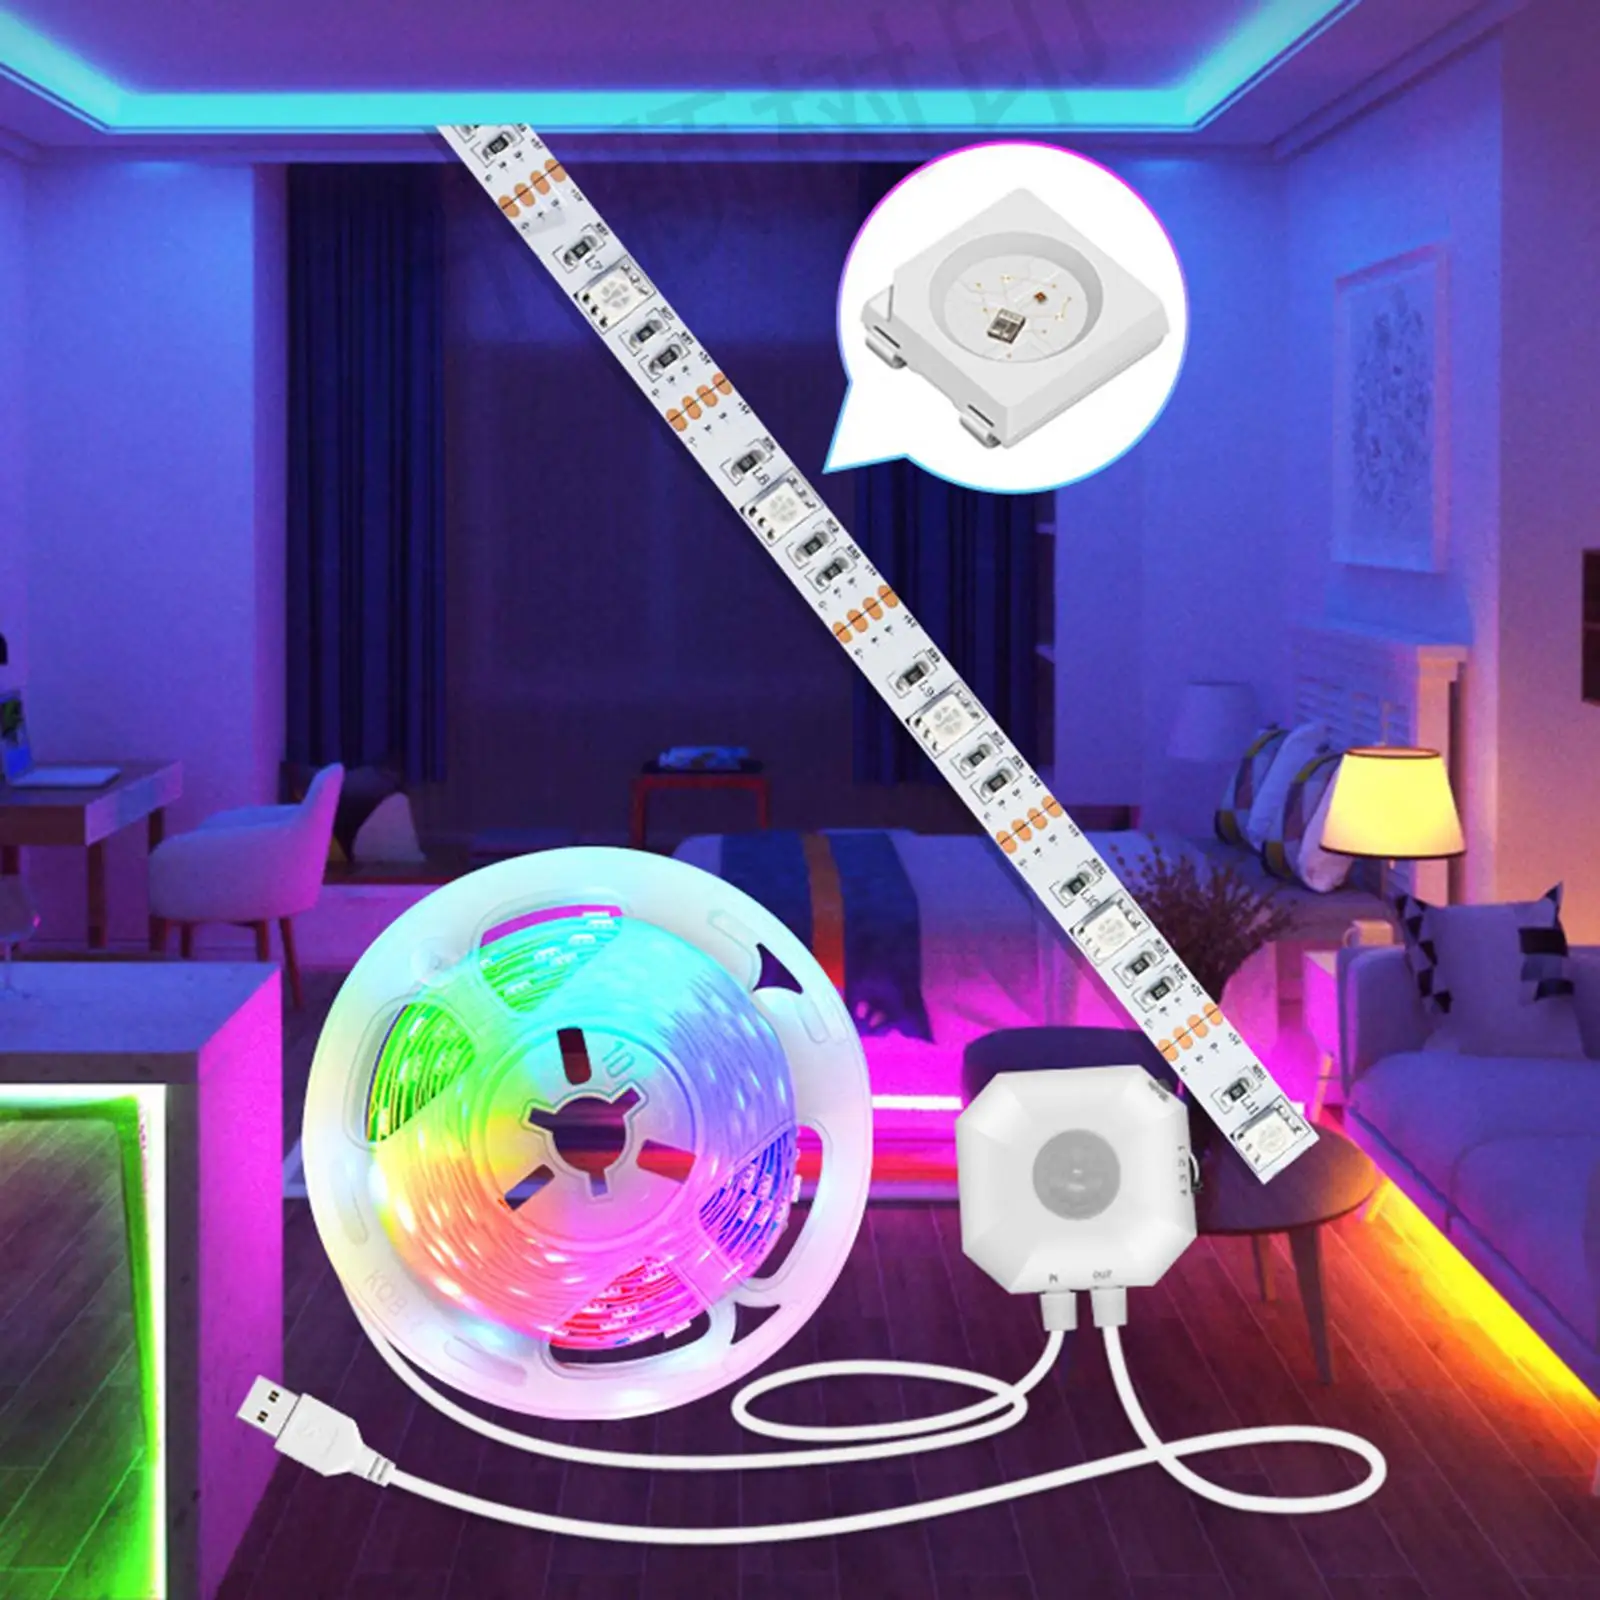 RGB 5050 LED Strip Lights Motion Sensor Kitchen Color Changing Bedroom App Control Home TV Backlight USB Powered RGB Stairs